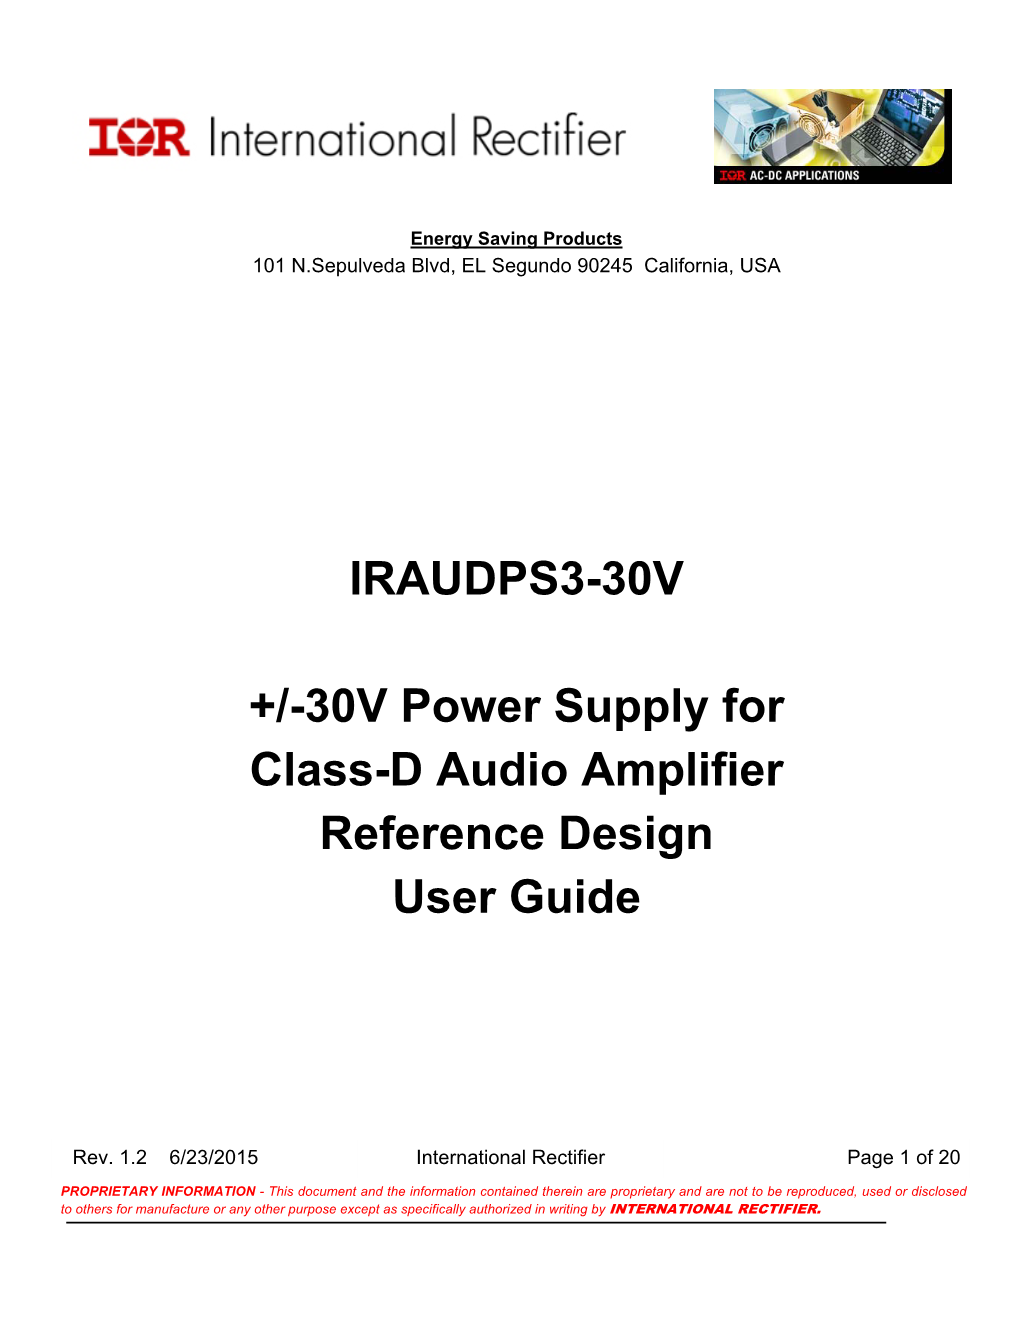 IRAUDPS3-30V +/-30V Power Supply for Class-D Audio Amplifier Reference Design User Guide